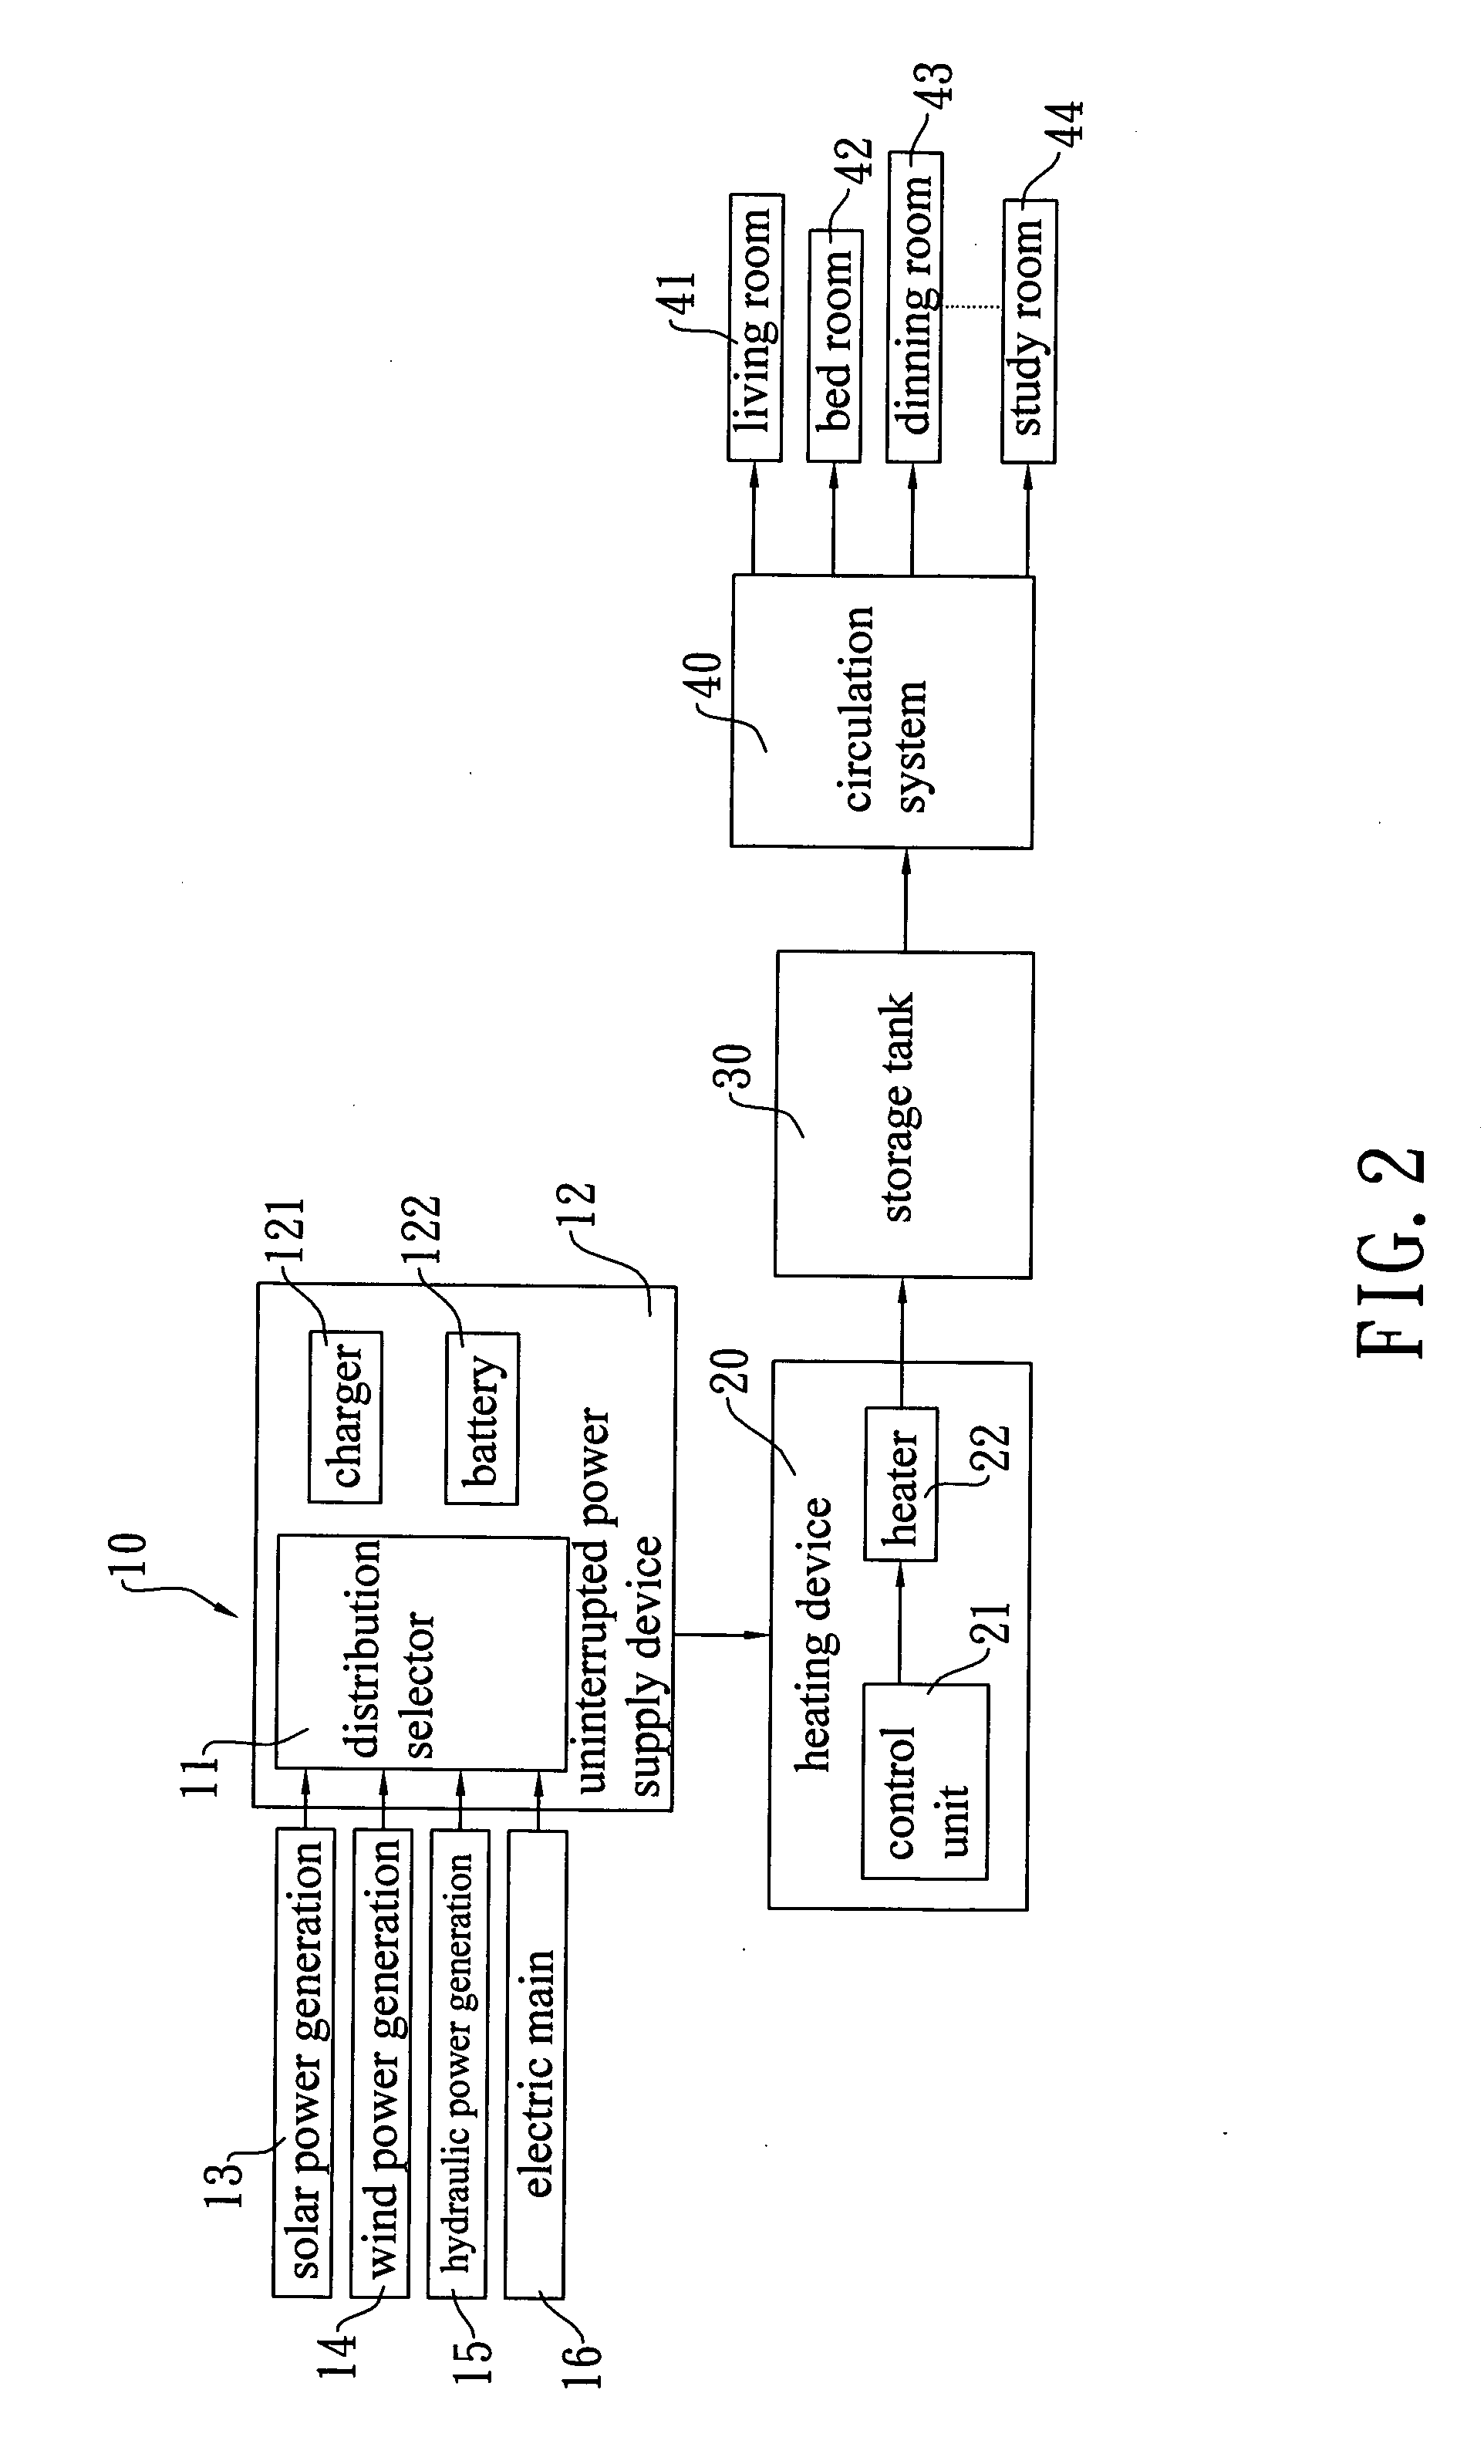 Multiple-power-selection heat storage device